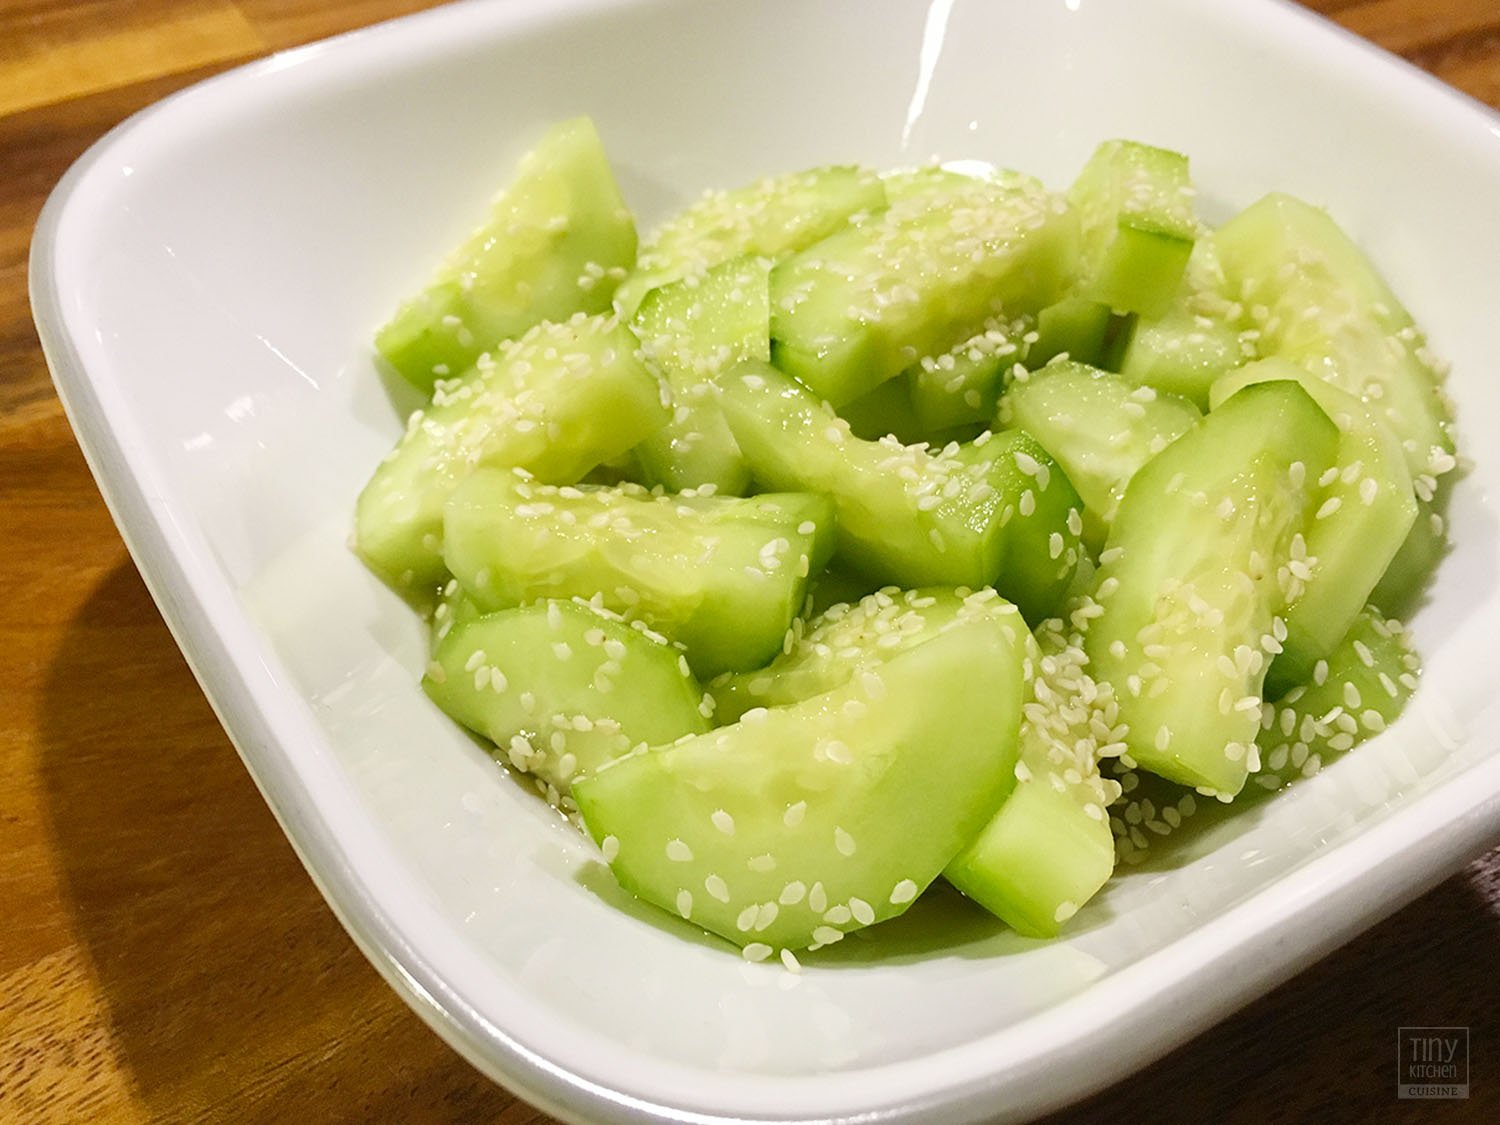 How to Make Sunomono: Japanese Cucumber Salad. Sunomono is a quick and easy japanese cucumber salad dressed with minimal ingredients. This recipe is a sweet and tangy side dish can go alongside any asian meal. | Tiny Kitchen Cuisine | https://tiny.kitchen